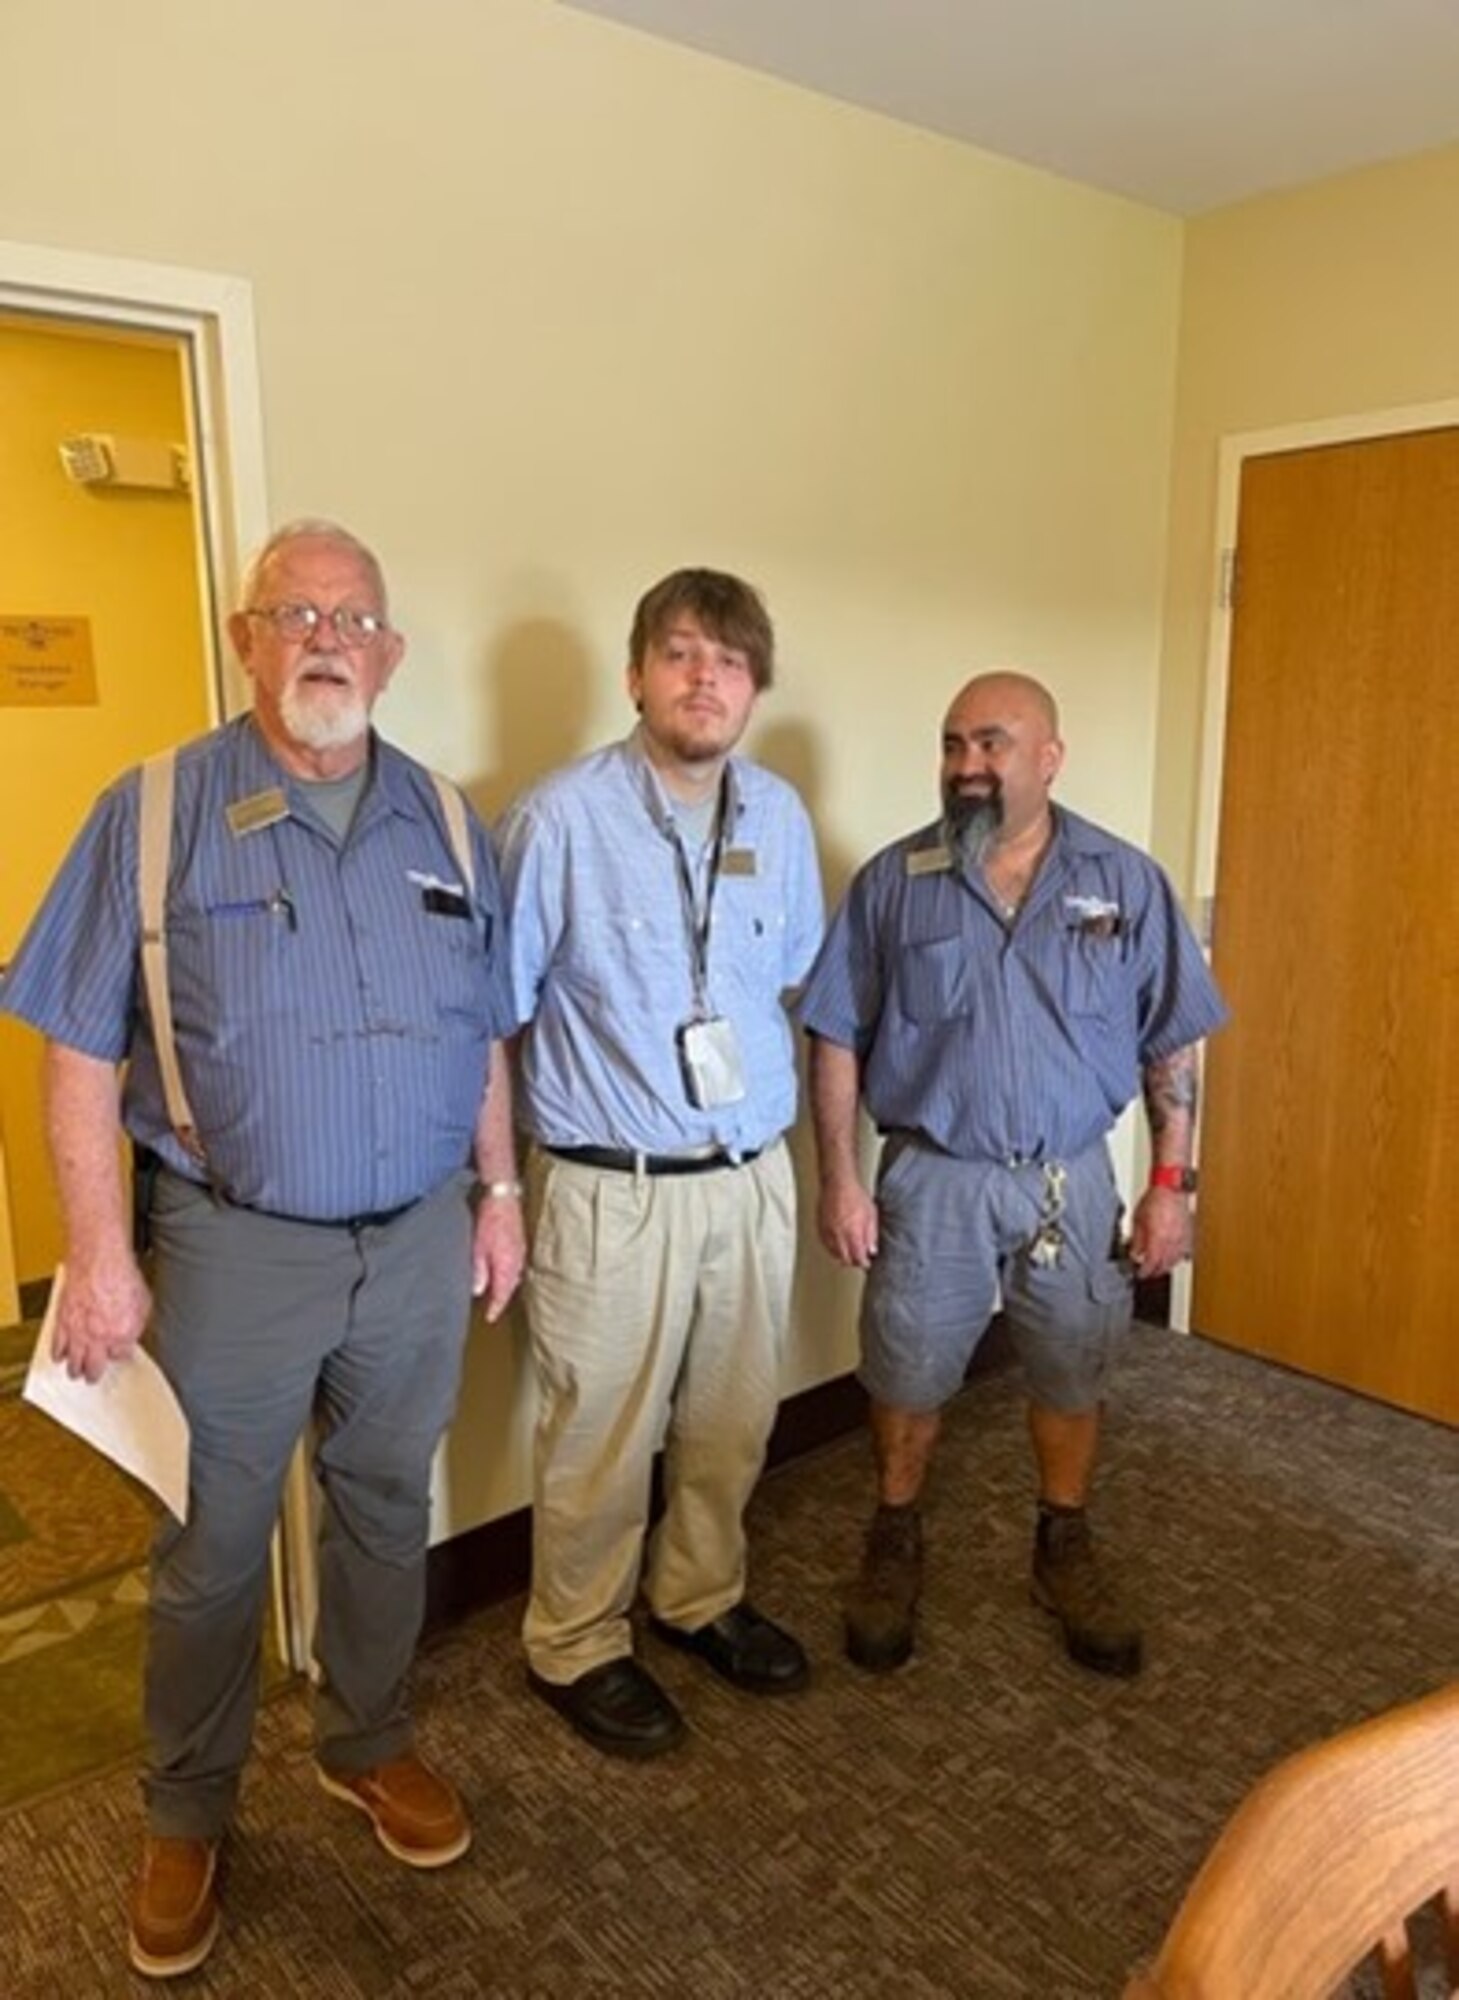 Courtesy photo of Dylan Landry, Project SEARCH intern, working with Maintenance staff members in Lodging.